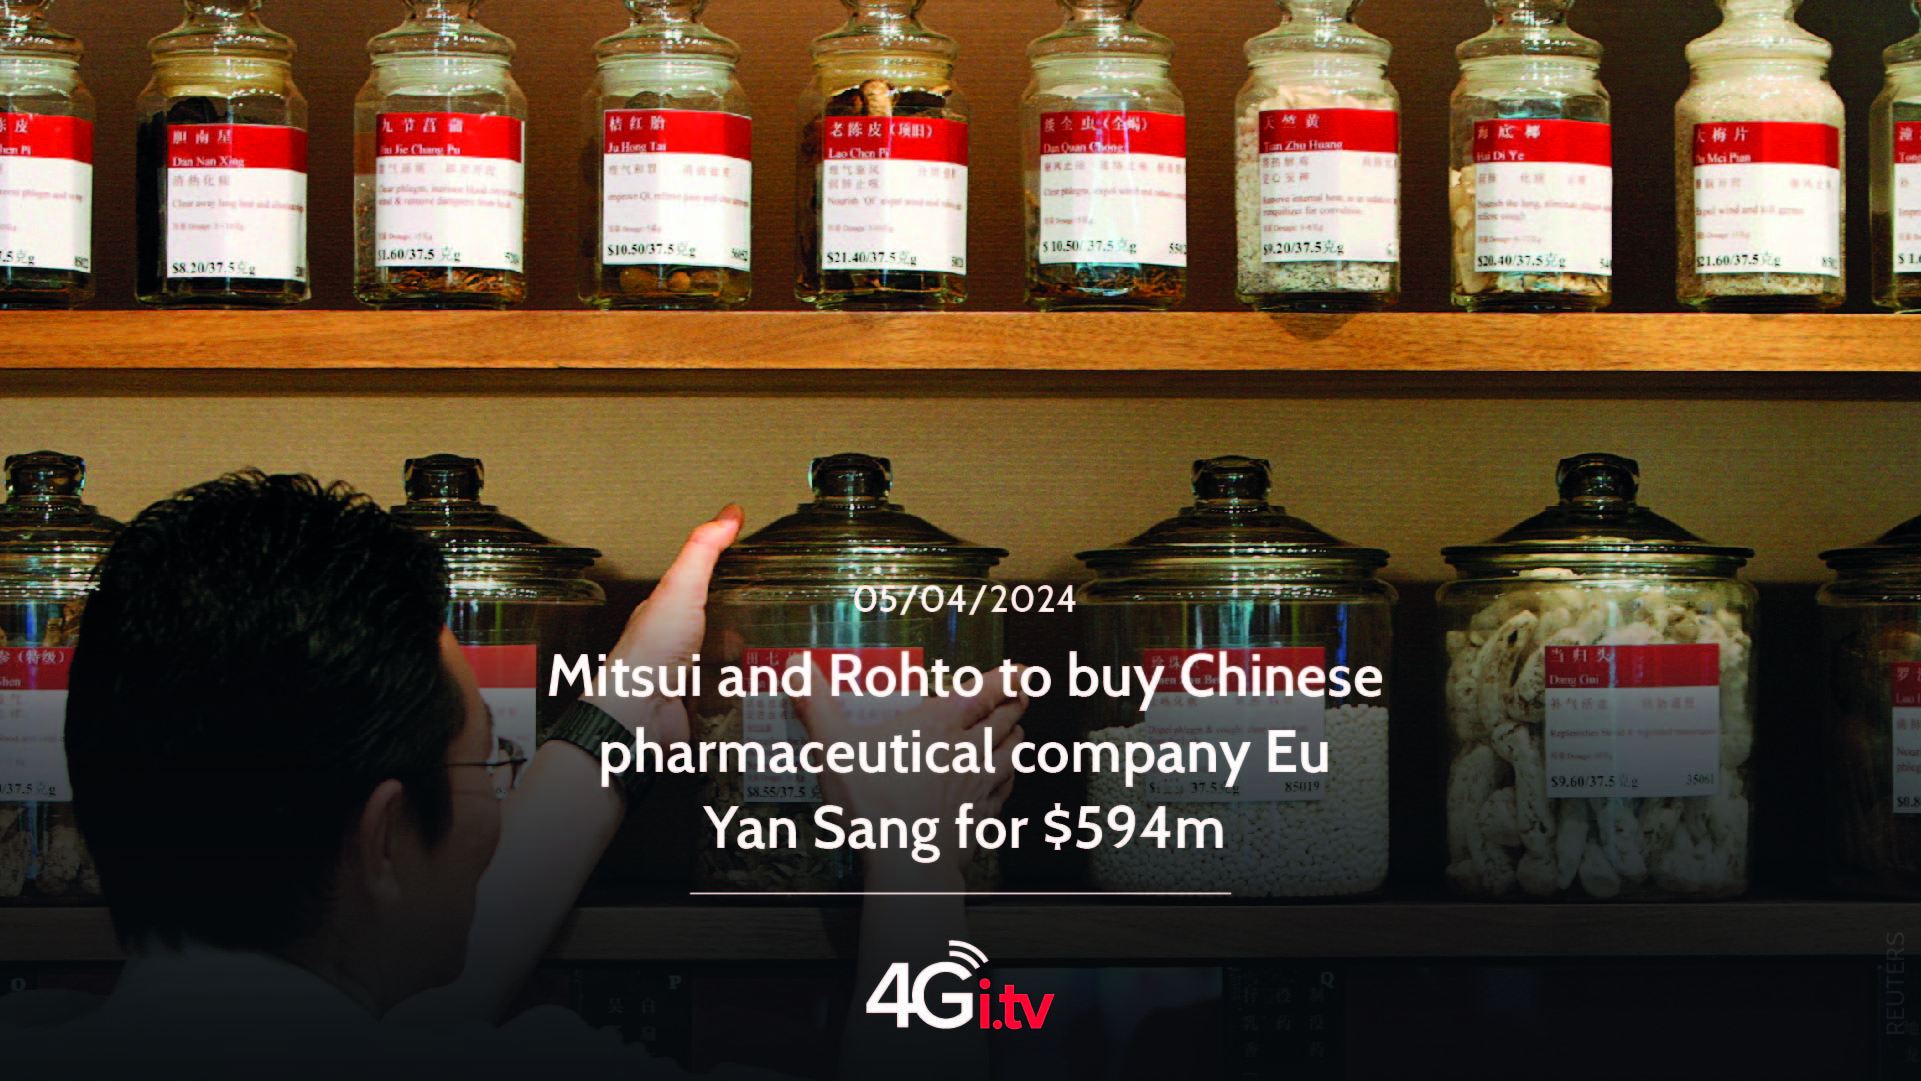 Lesen Sie mehr über den Artikel Mitsui and Rohto to buy Chinese pharmaceutical company Eu Yan Sang for $594m